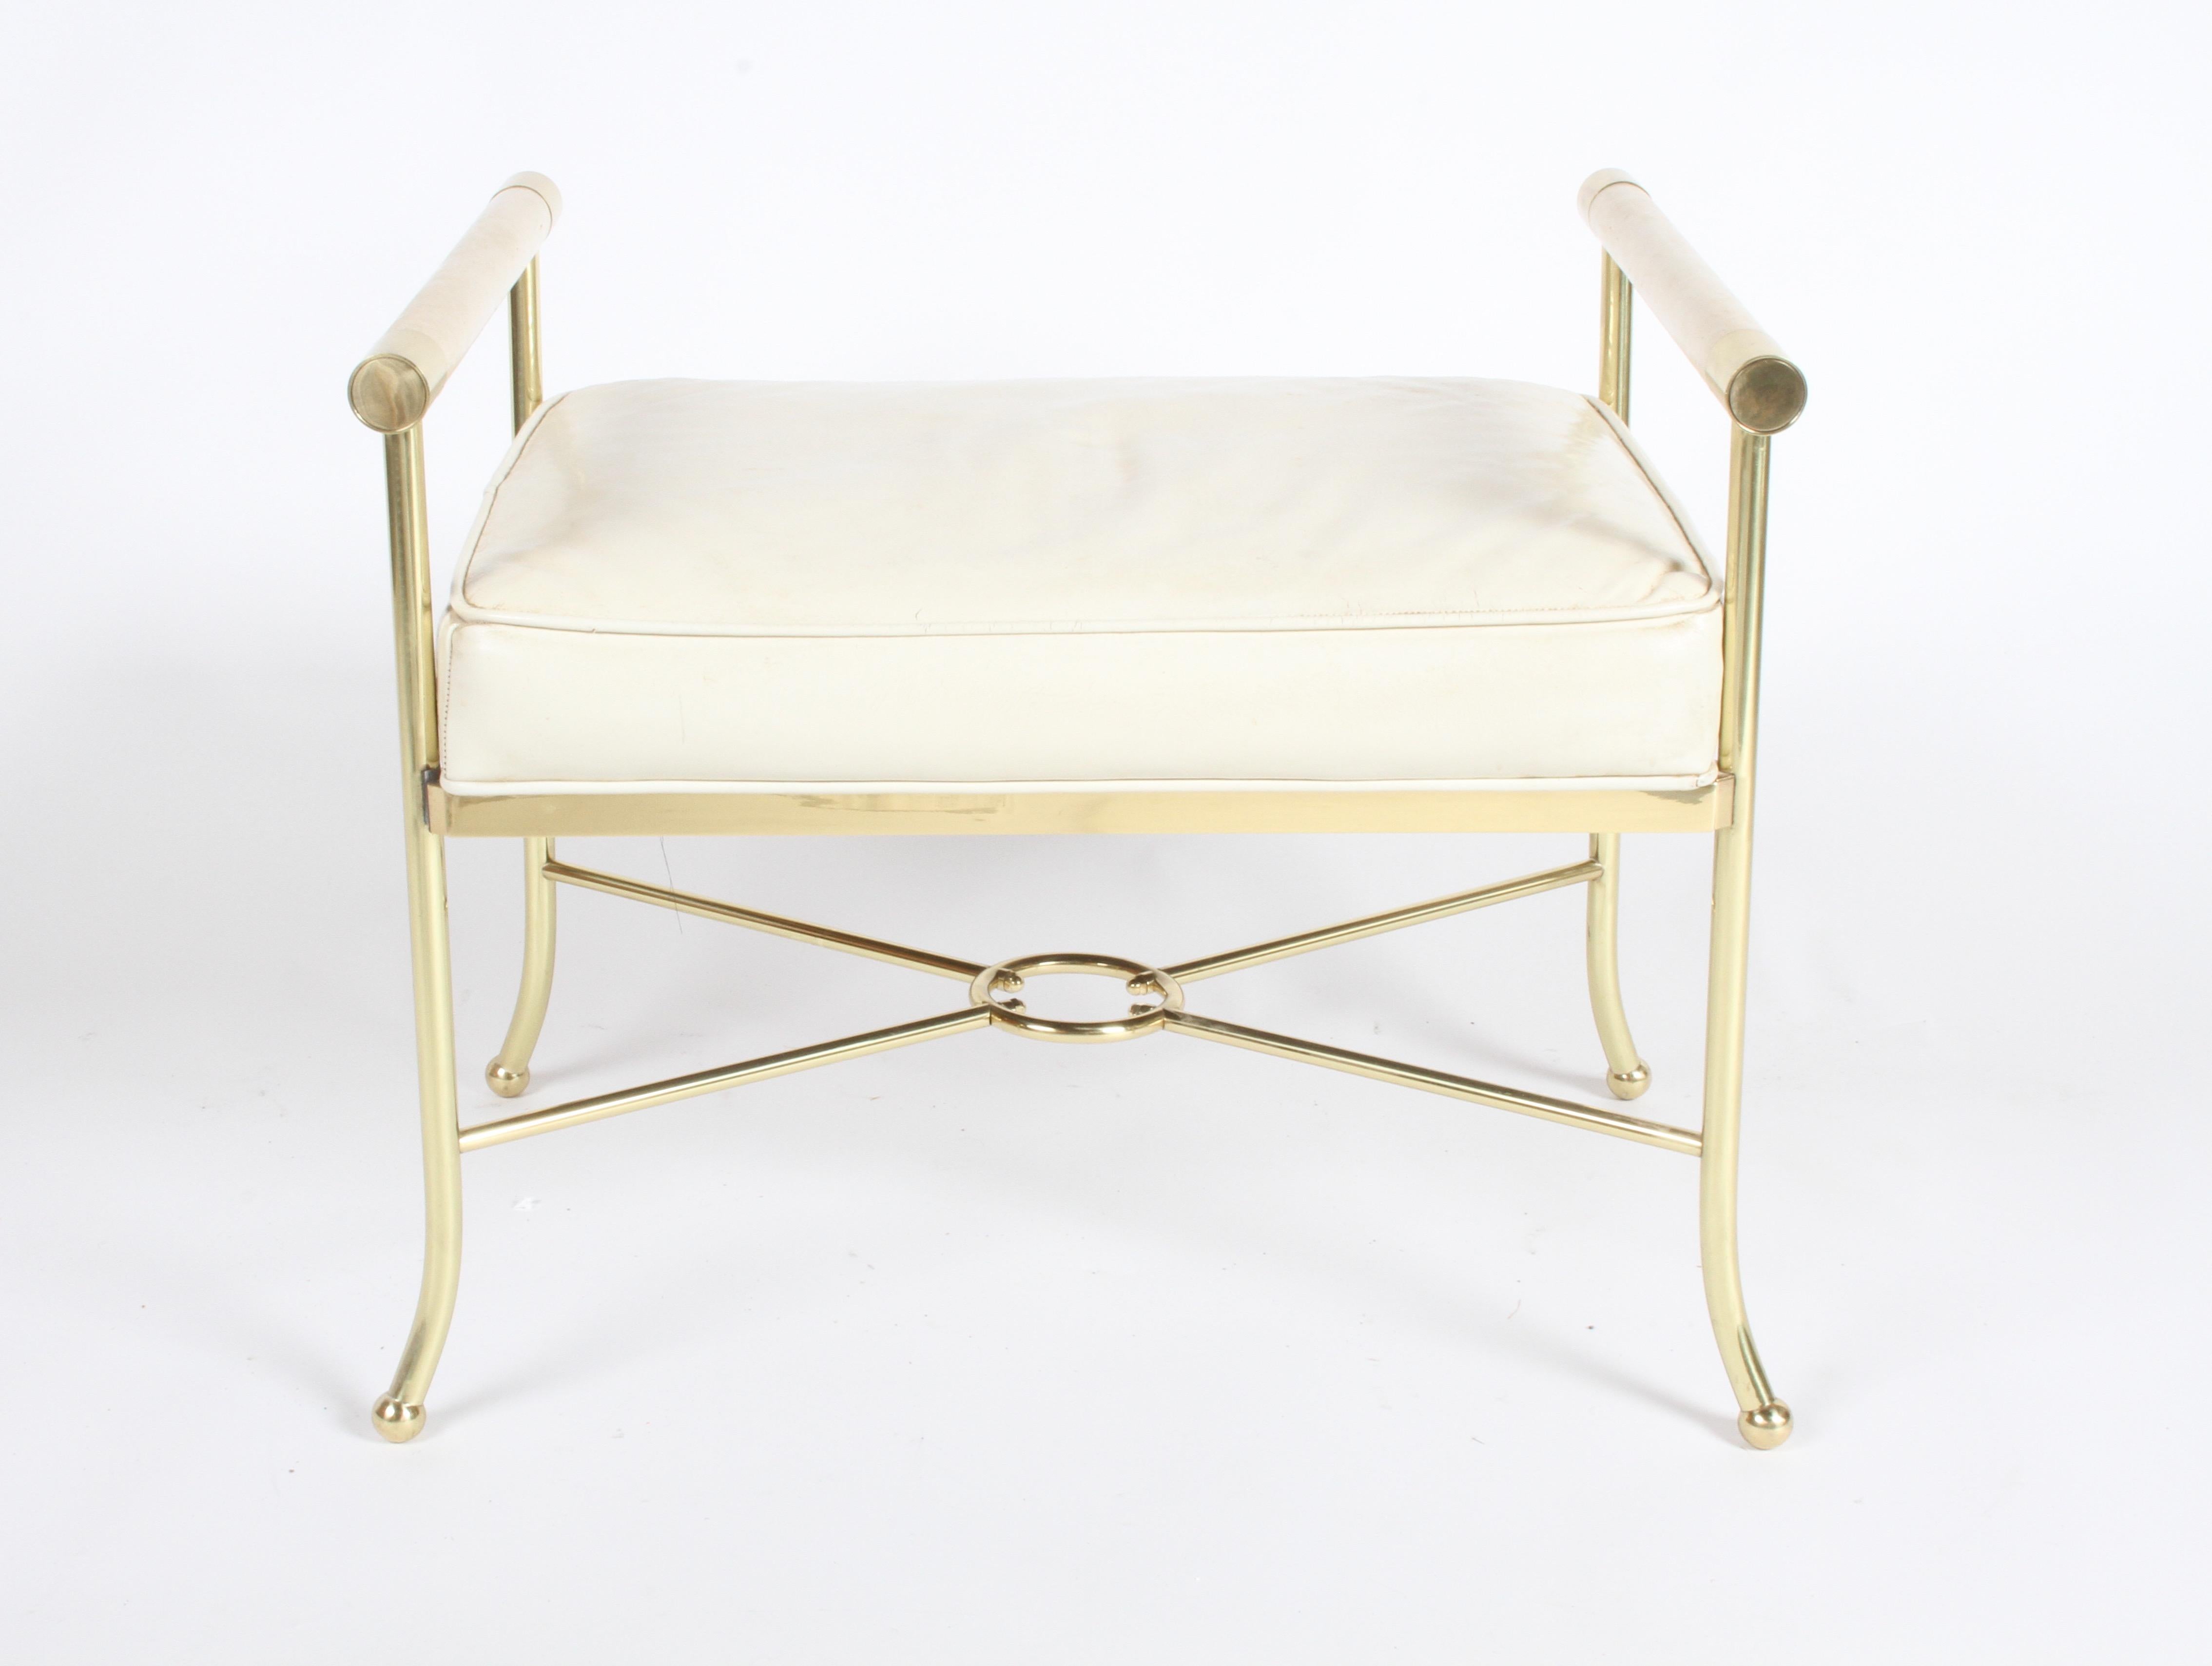 High Style Hollywood Regency brass and leather vanity bench or stool. Made of heavy brass, with original white leather seat and arms on splayed legs. Very well made, super high quality. From one owner estate, filled with MCM. Brass has been